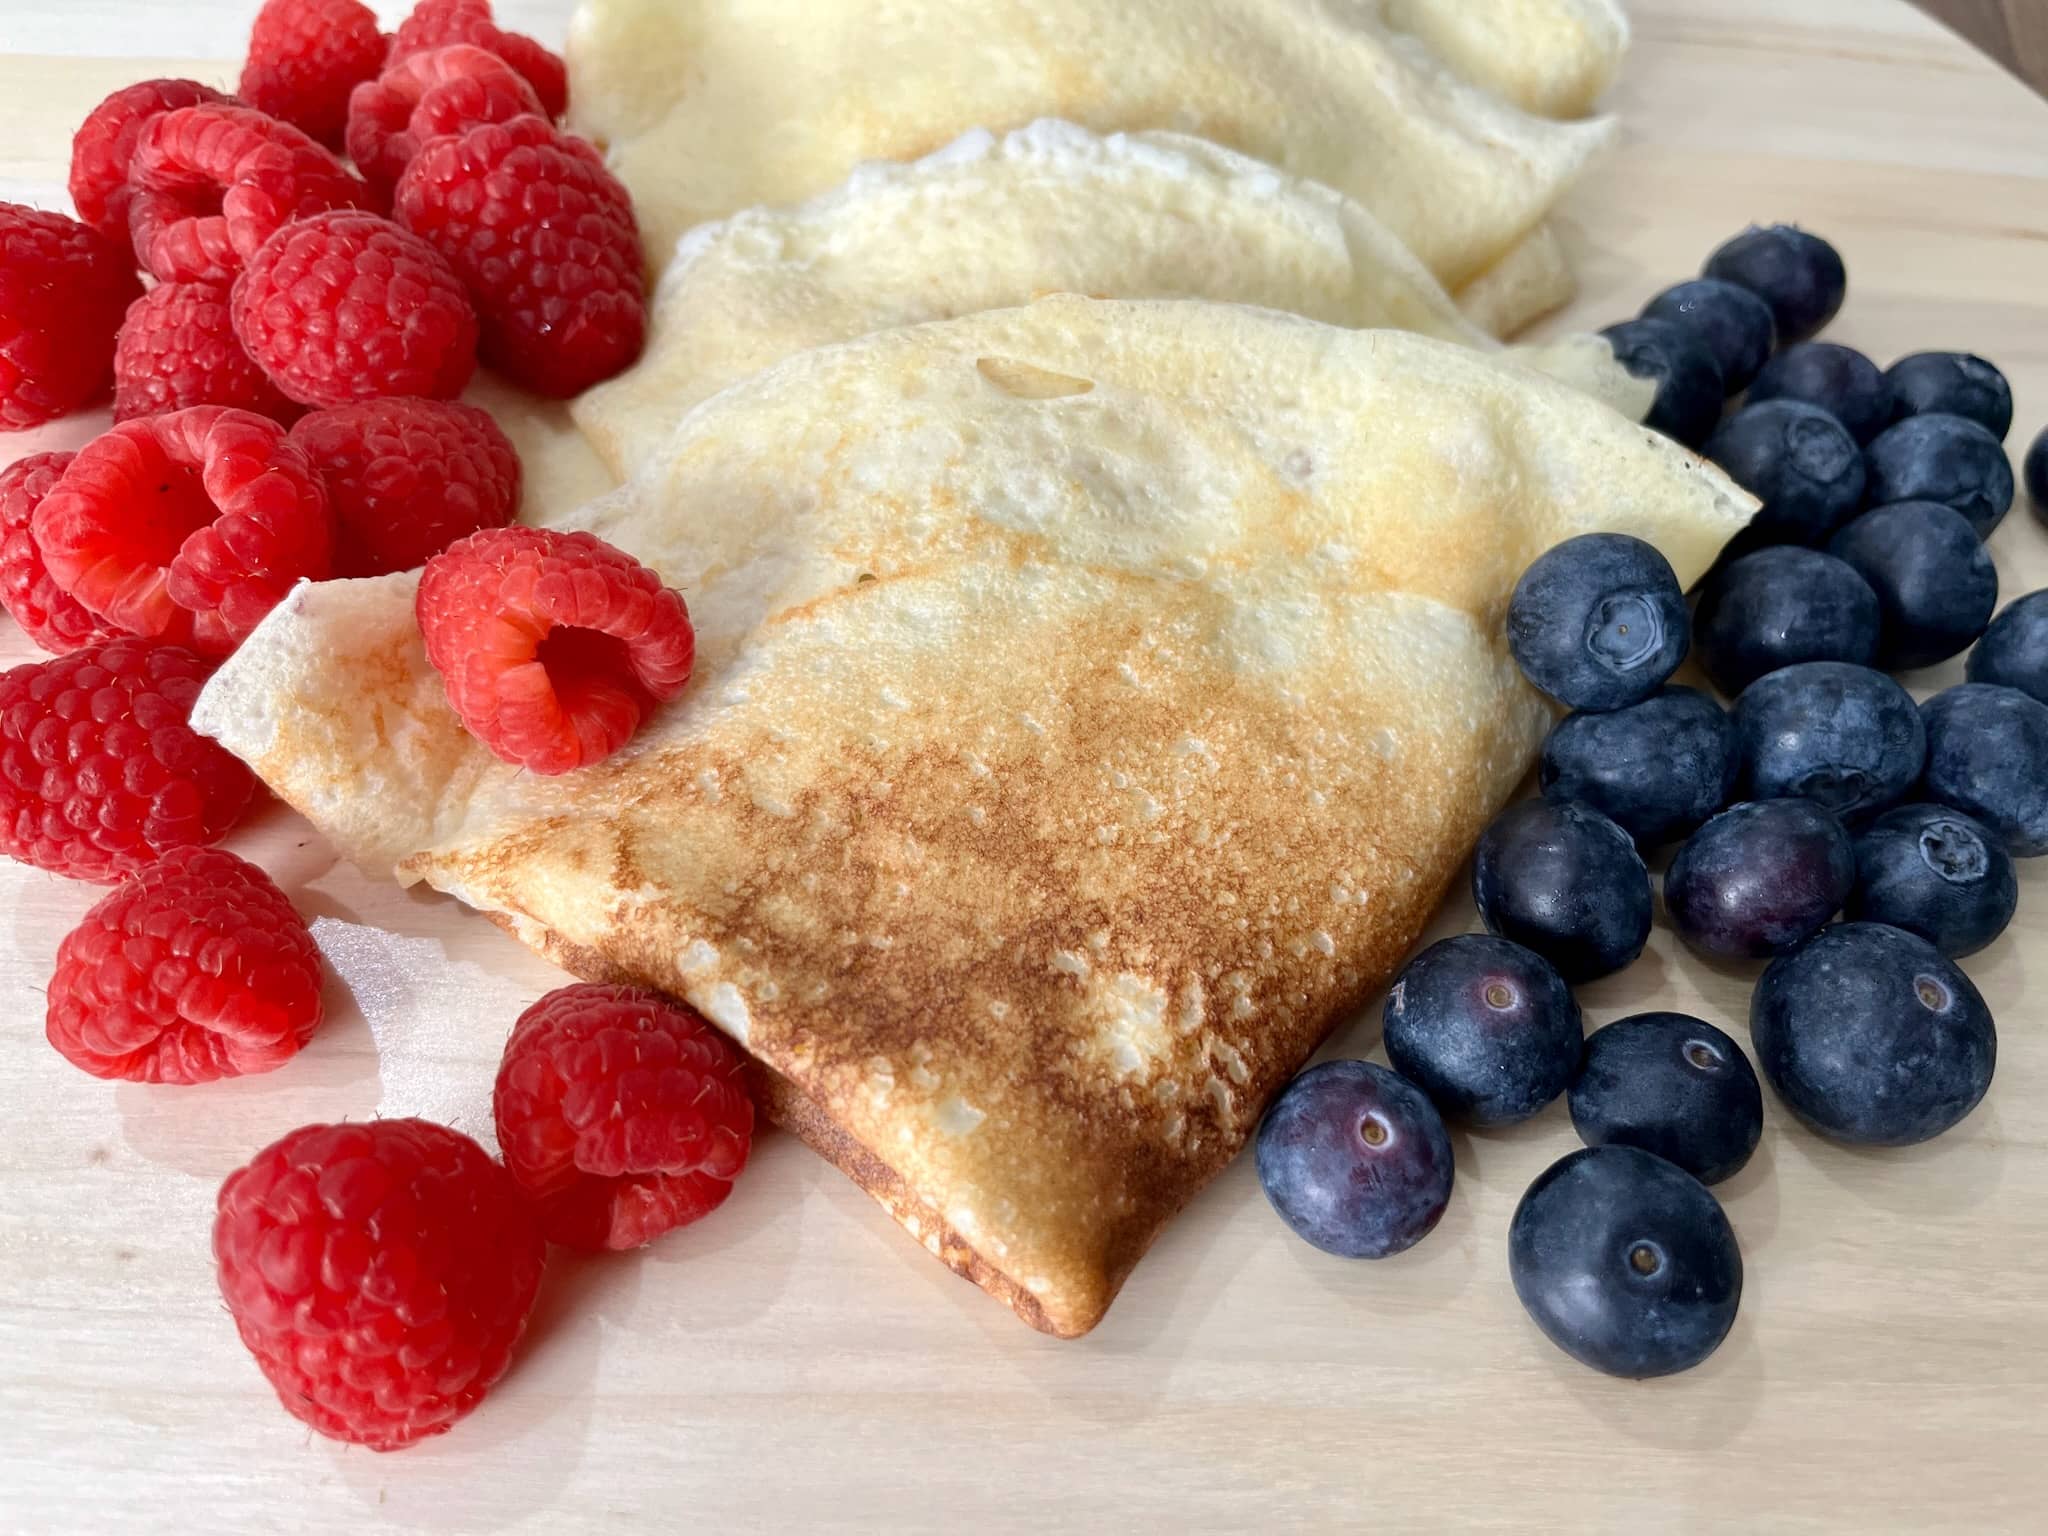 Folded Crêpes with blueberries and raspberries on the sides